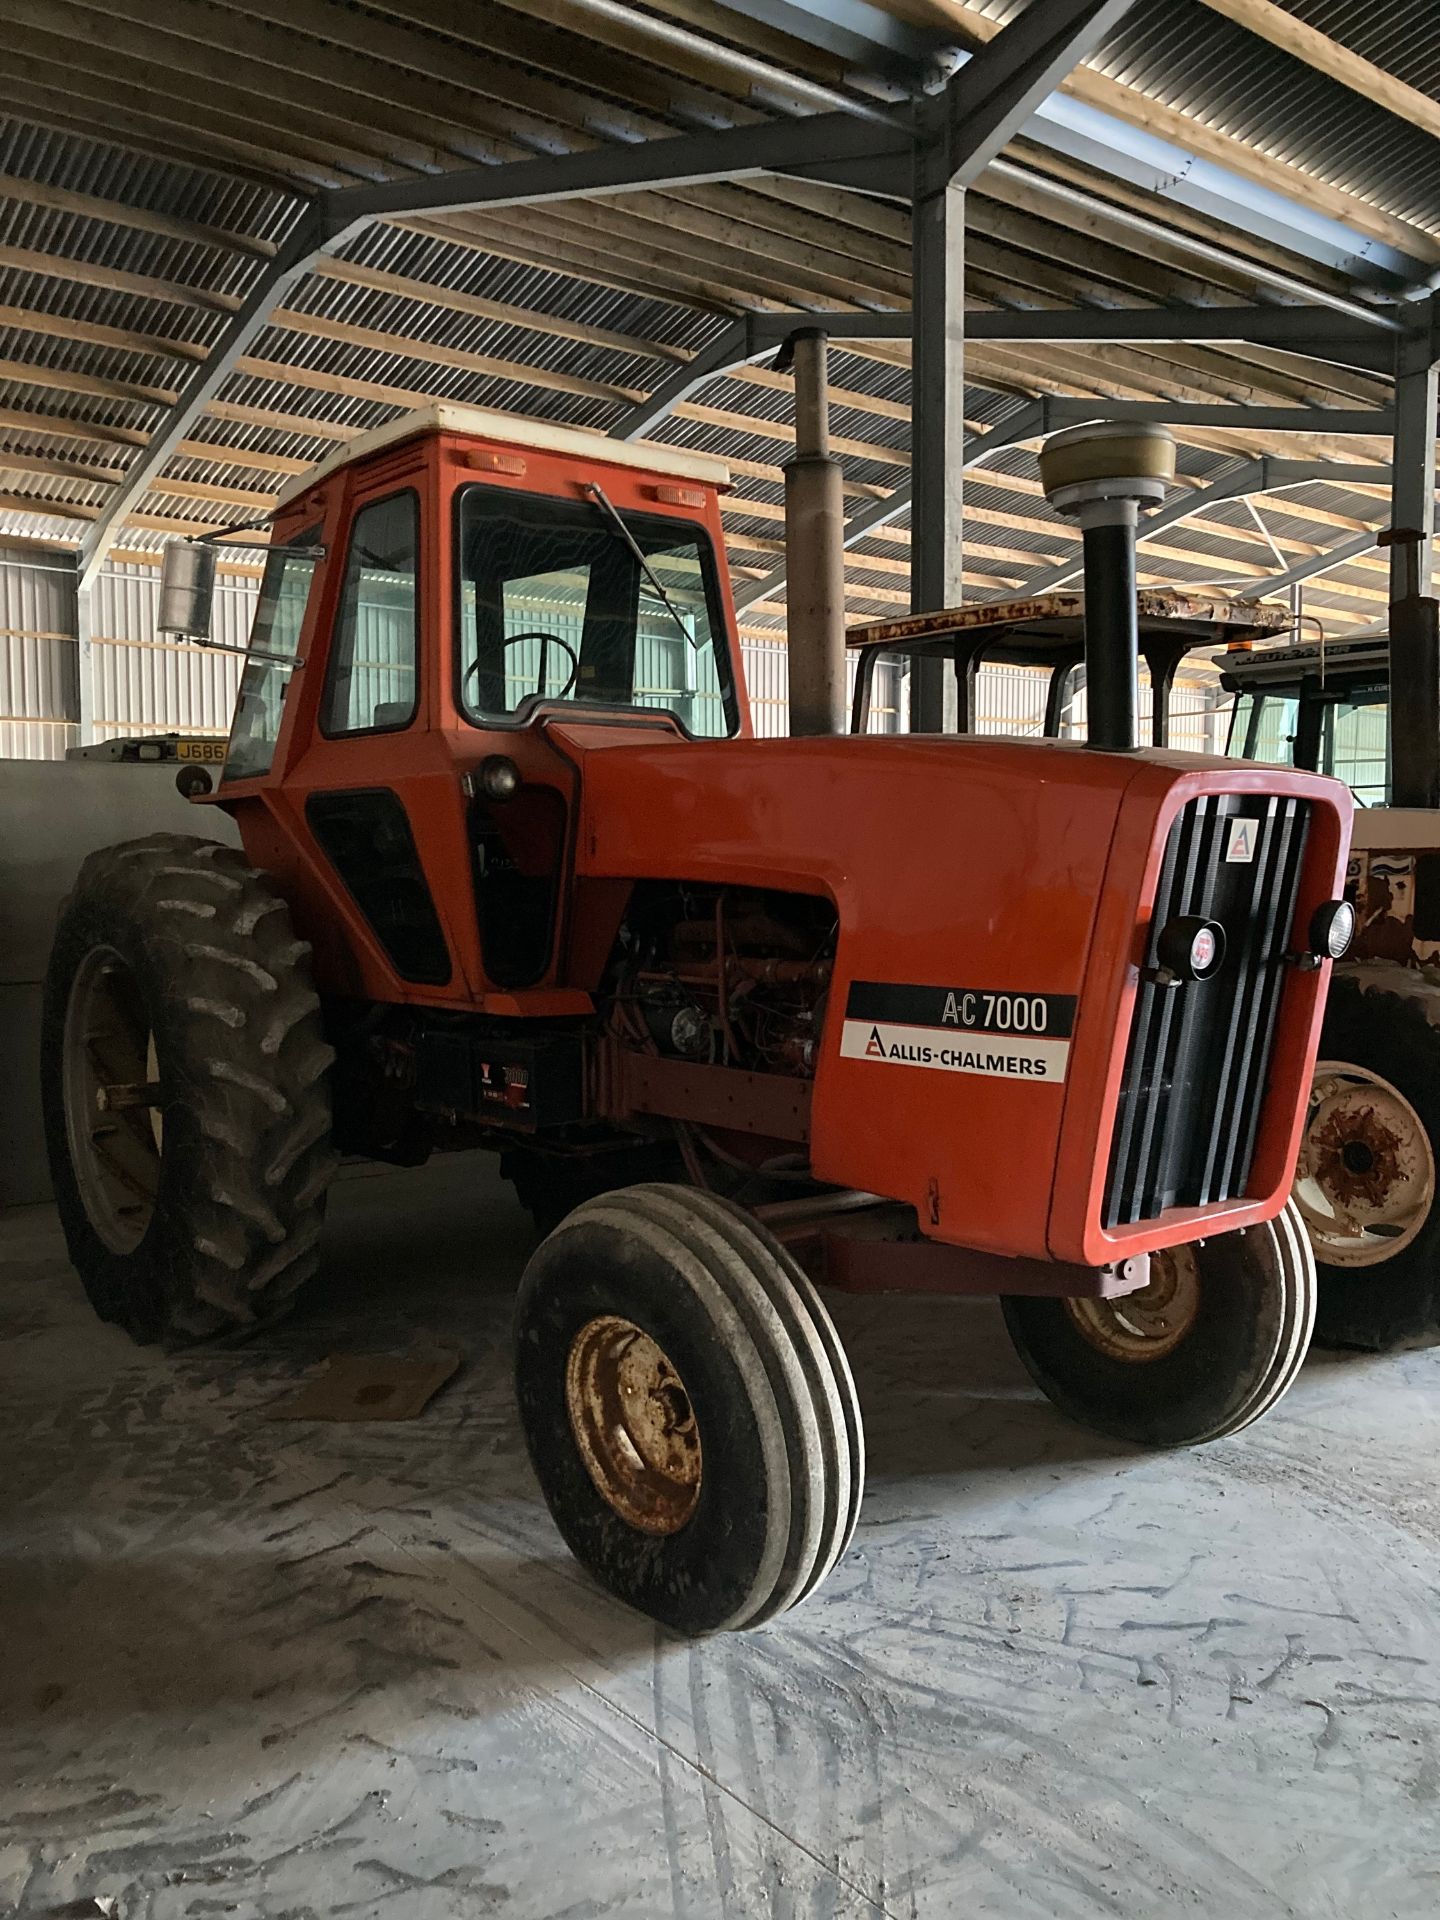 ALLIS CHALMERS AC7000 - Image 4 of 15